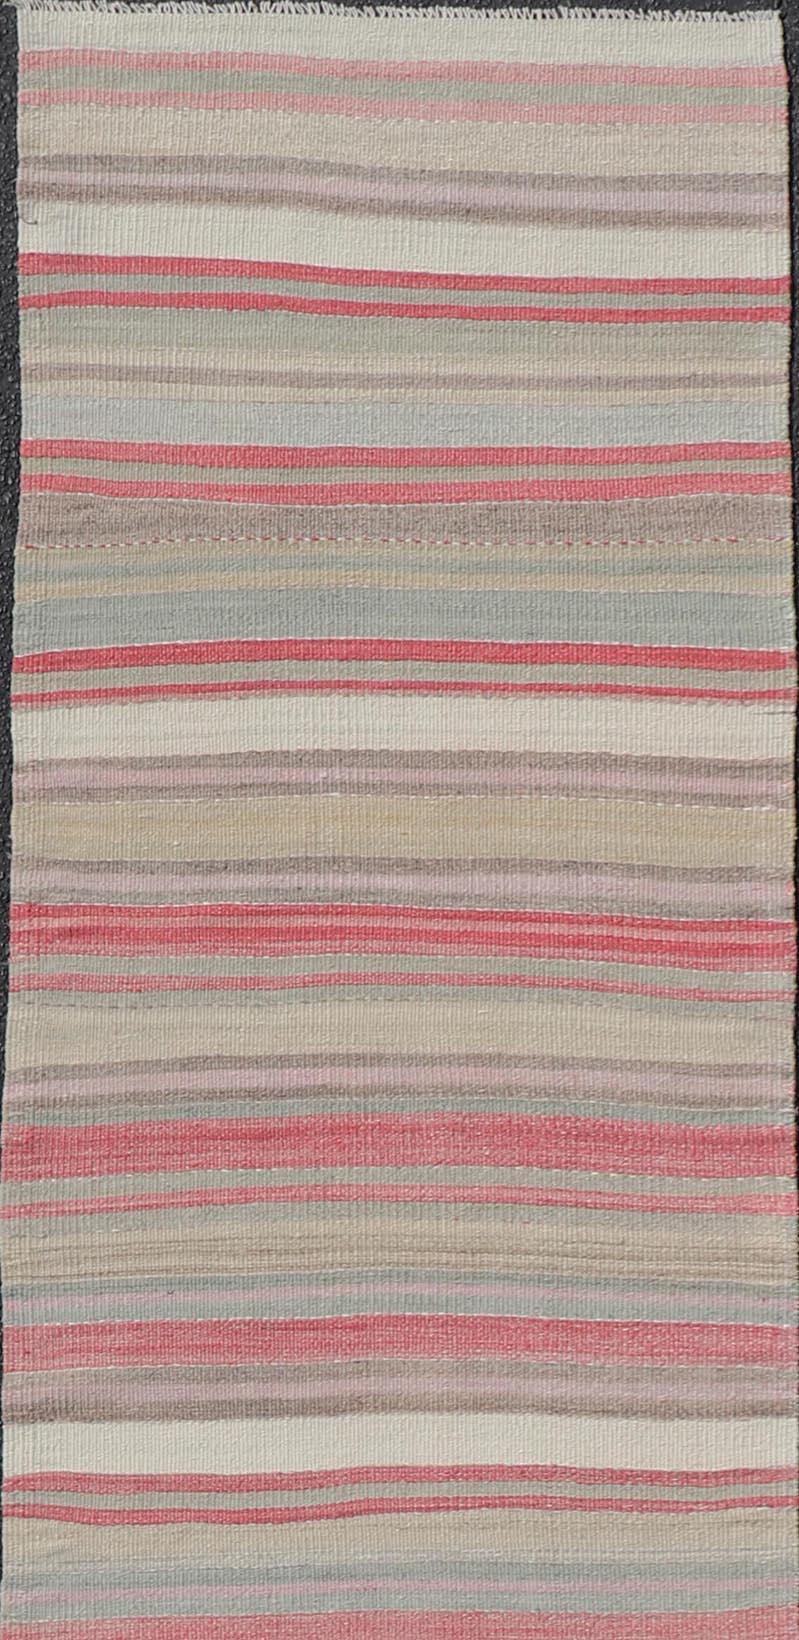 Colorful Vintage Turkish Kilim Runner with Stripes and Multi Colors. Keivan Woven Arts / rug EN-178649, country of origin / type: Turkey / Kilim, circa Mid-20th century.
Measures: 2'6 x 13'5 
Featuring a repeating horizontal stripe design, this